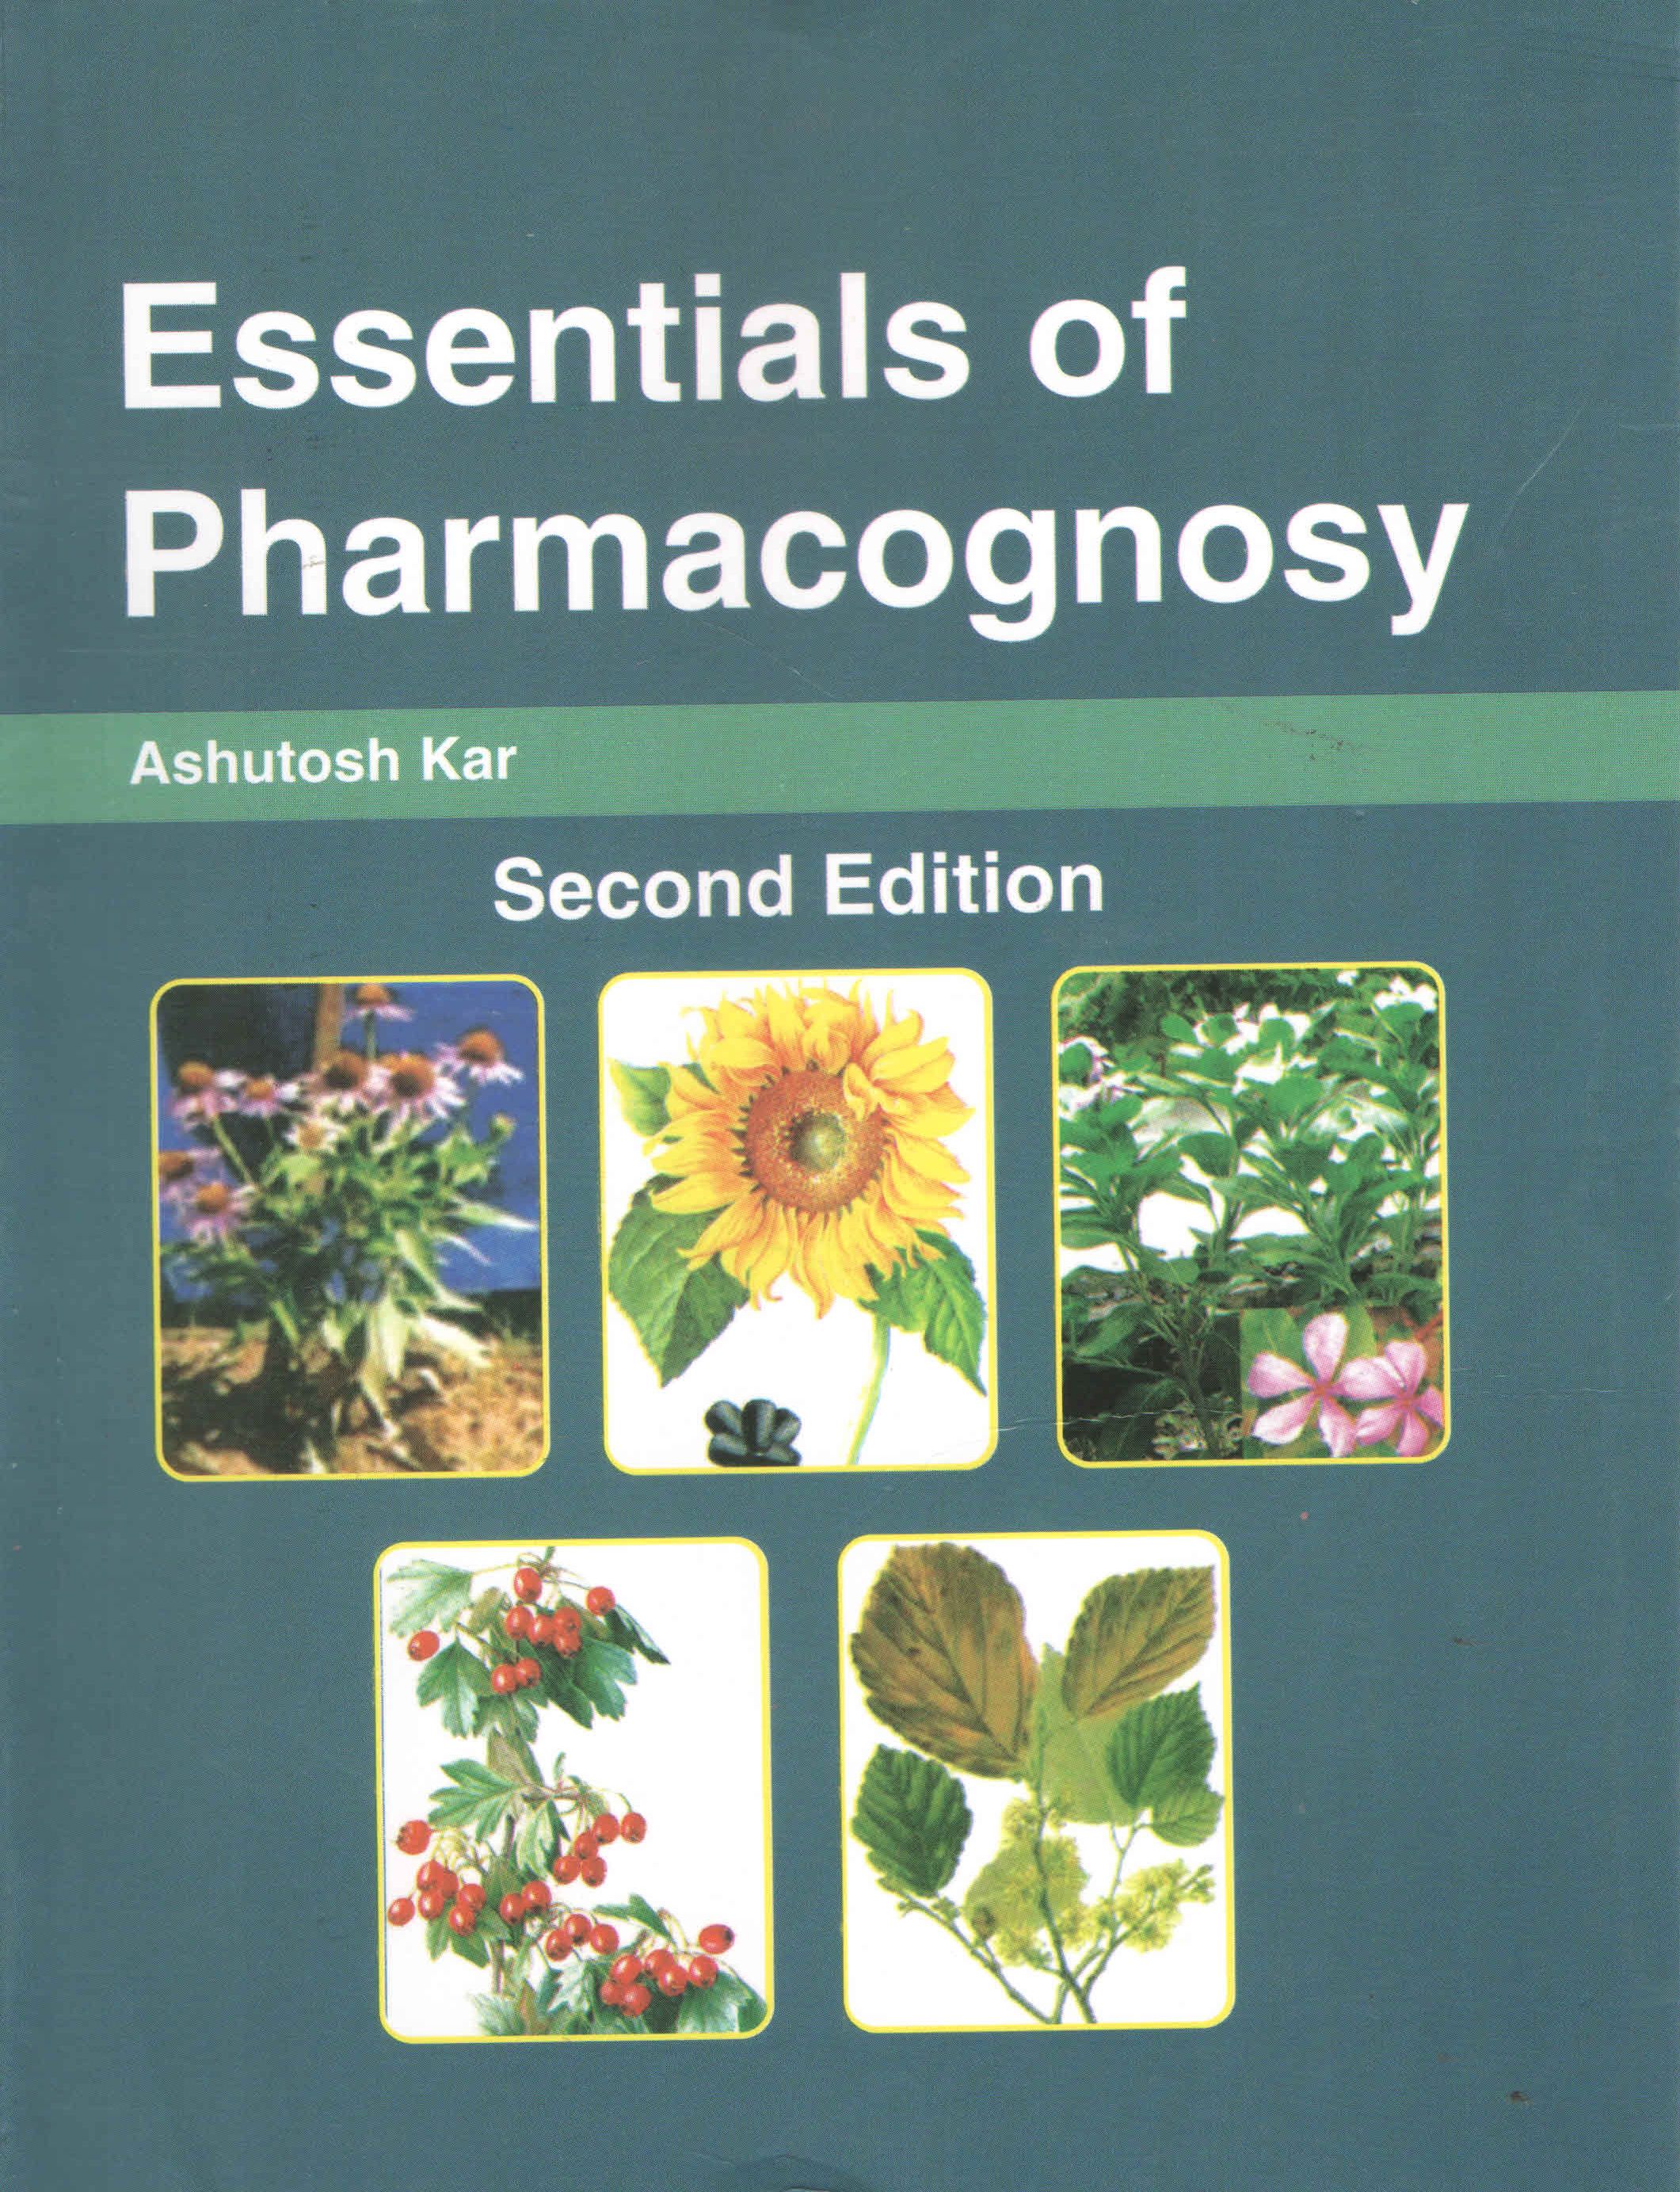 

exclusive-publishers/ahuja-publishing-house/essentials-of-pharmacognosy-9788119714407